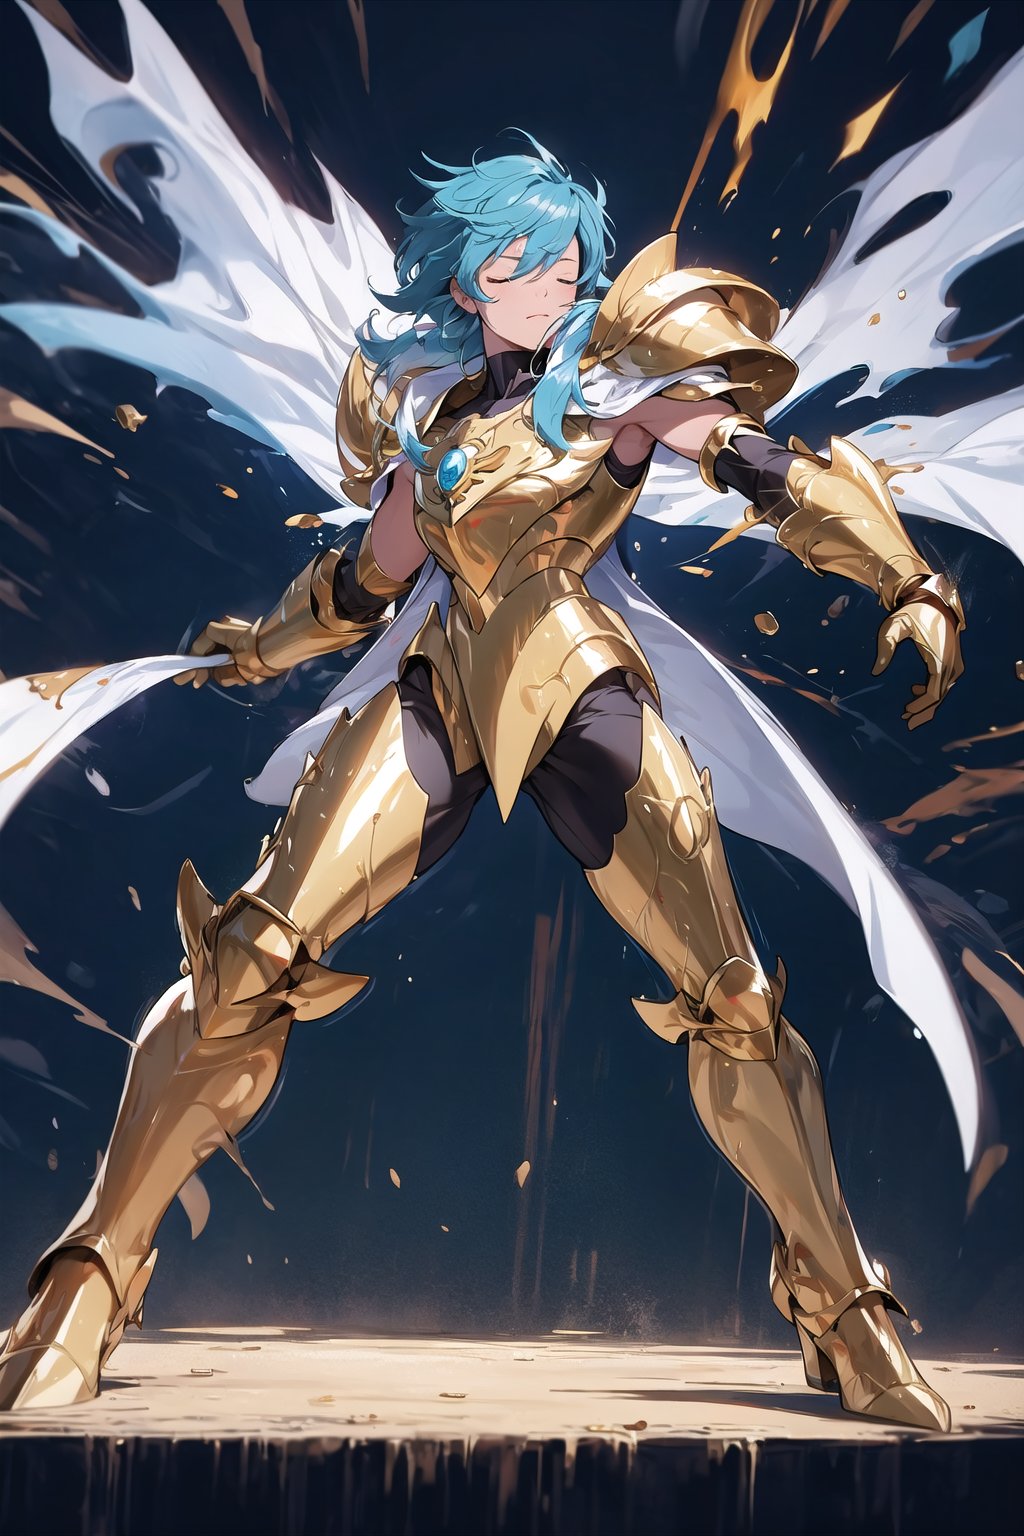 absurdres, highres, ultra detailed,Insane detail in face,  (boy:1.3), Gold Saint, Saint Seiya Style, paint splatter, expressive drips, random patterns, energetic movement, bold colors, dynamic texture, spontaneous creativity, Gold Armor, Full body armor, no helmet, Zodiac Knights, White long cape, blue hair, Fighting pose,Pokemon Gotcha Style, gold gloves, long hair, white cape, messy_hair,  closed eyes, 